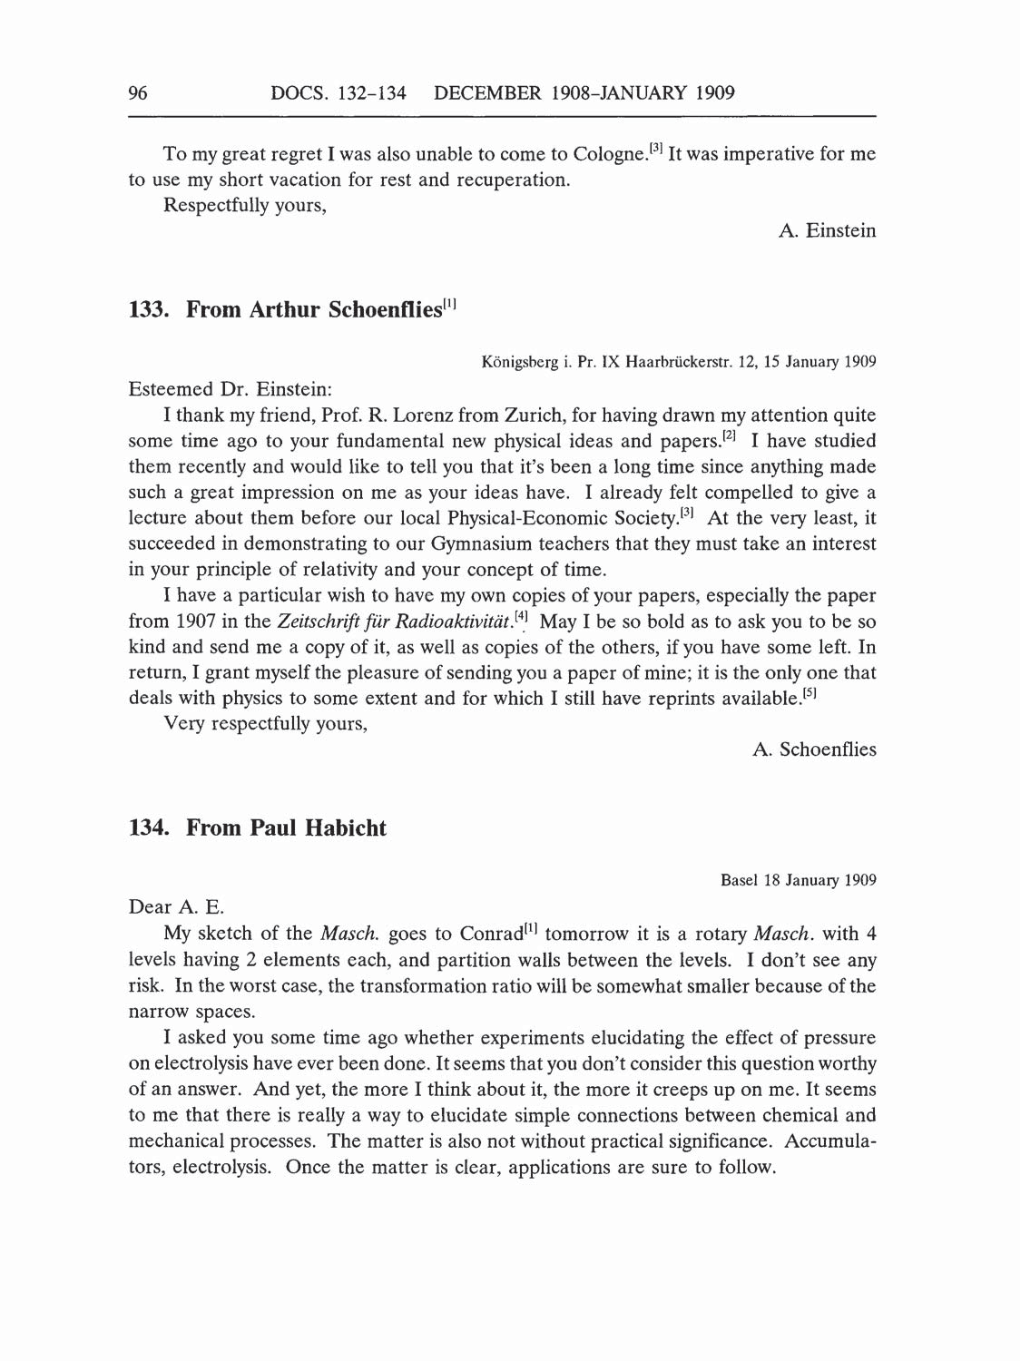 Volume 5: The Swiss Years: Correspondence, 1902-1914 (English translation supplement) page 96